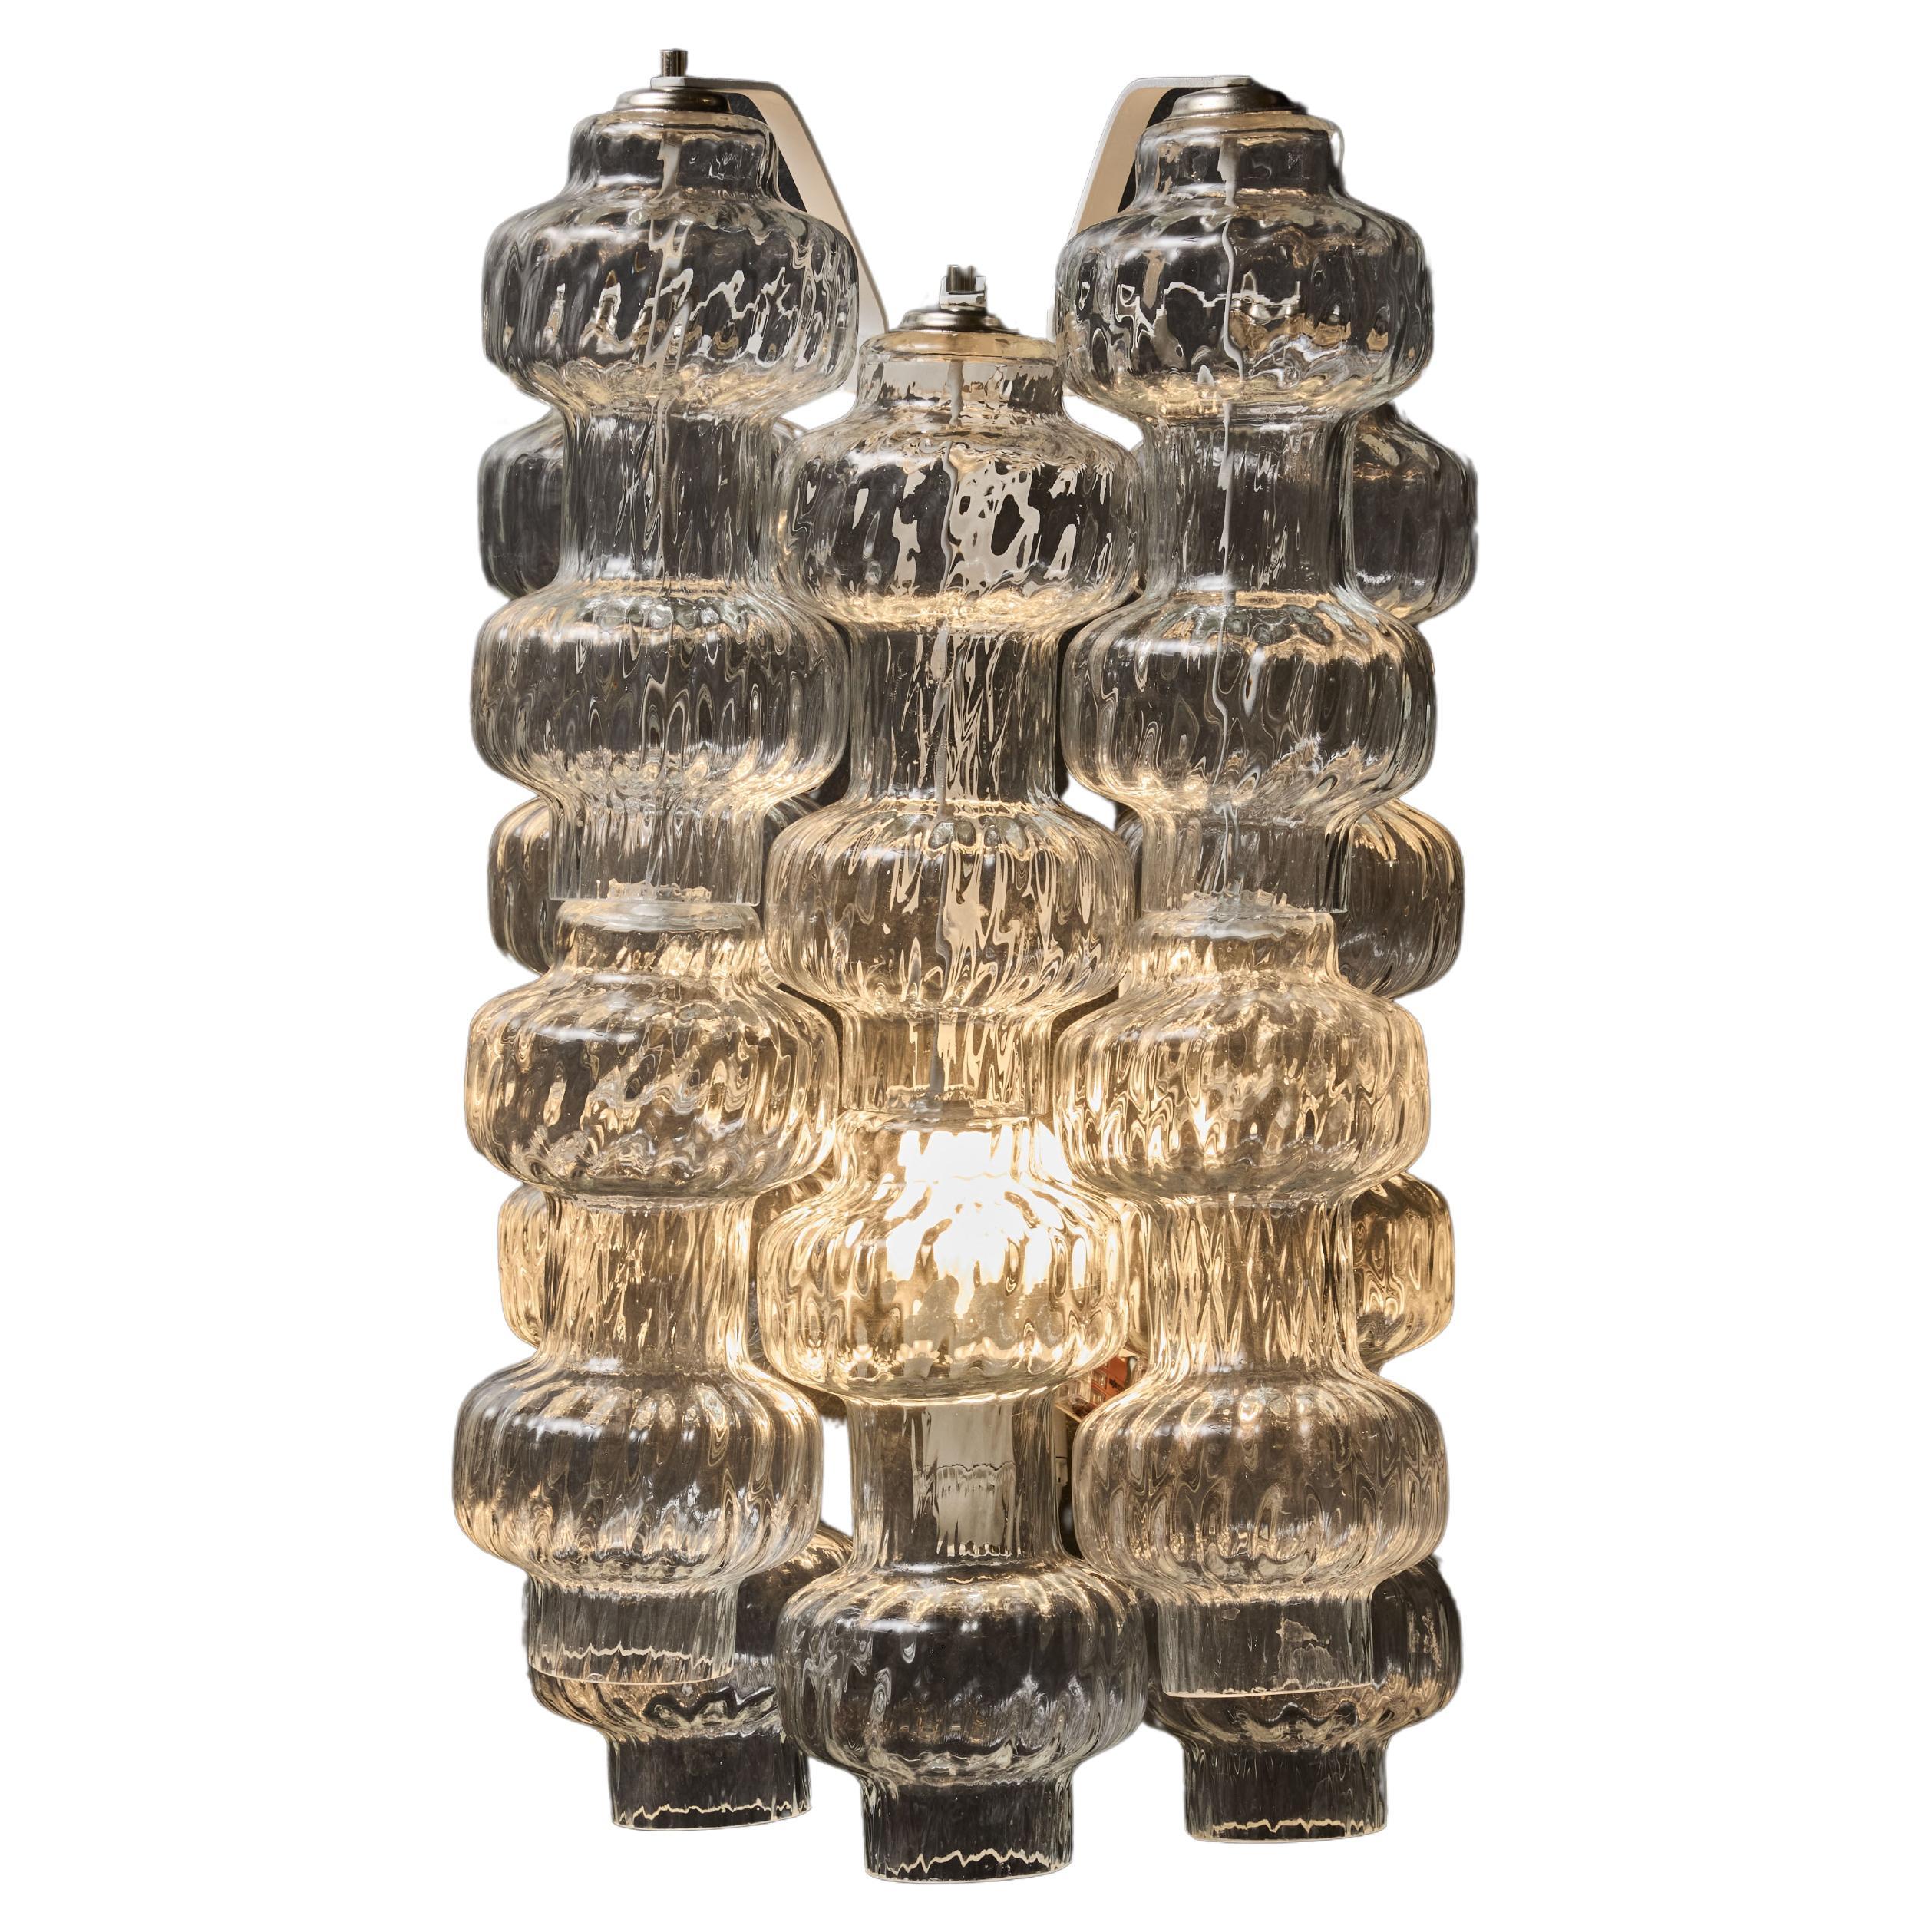 Pair of Murano Glass Wall Sconces by Carlo Scarpa